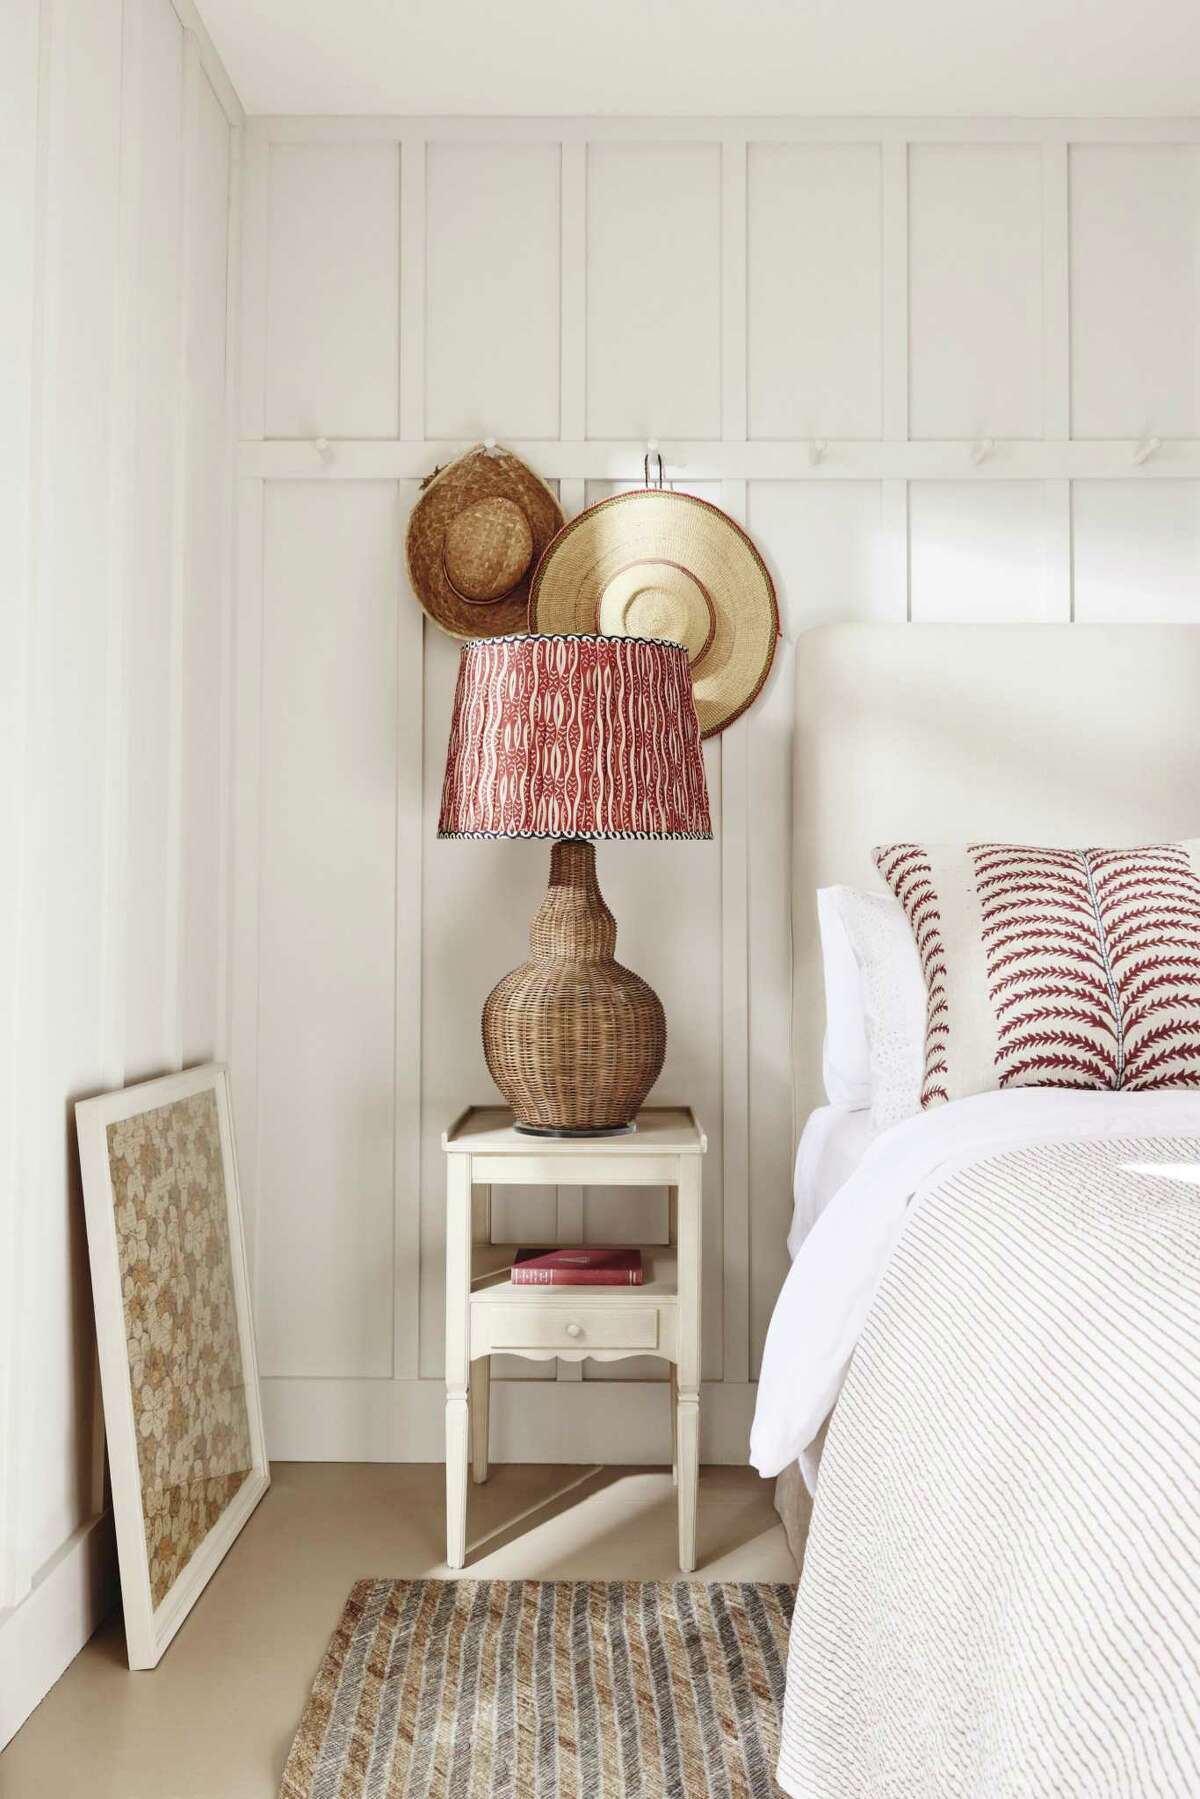 Pleated lampshades with color and pattern are shown in photos fro OKA Houston.